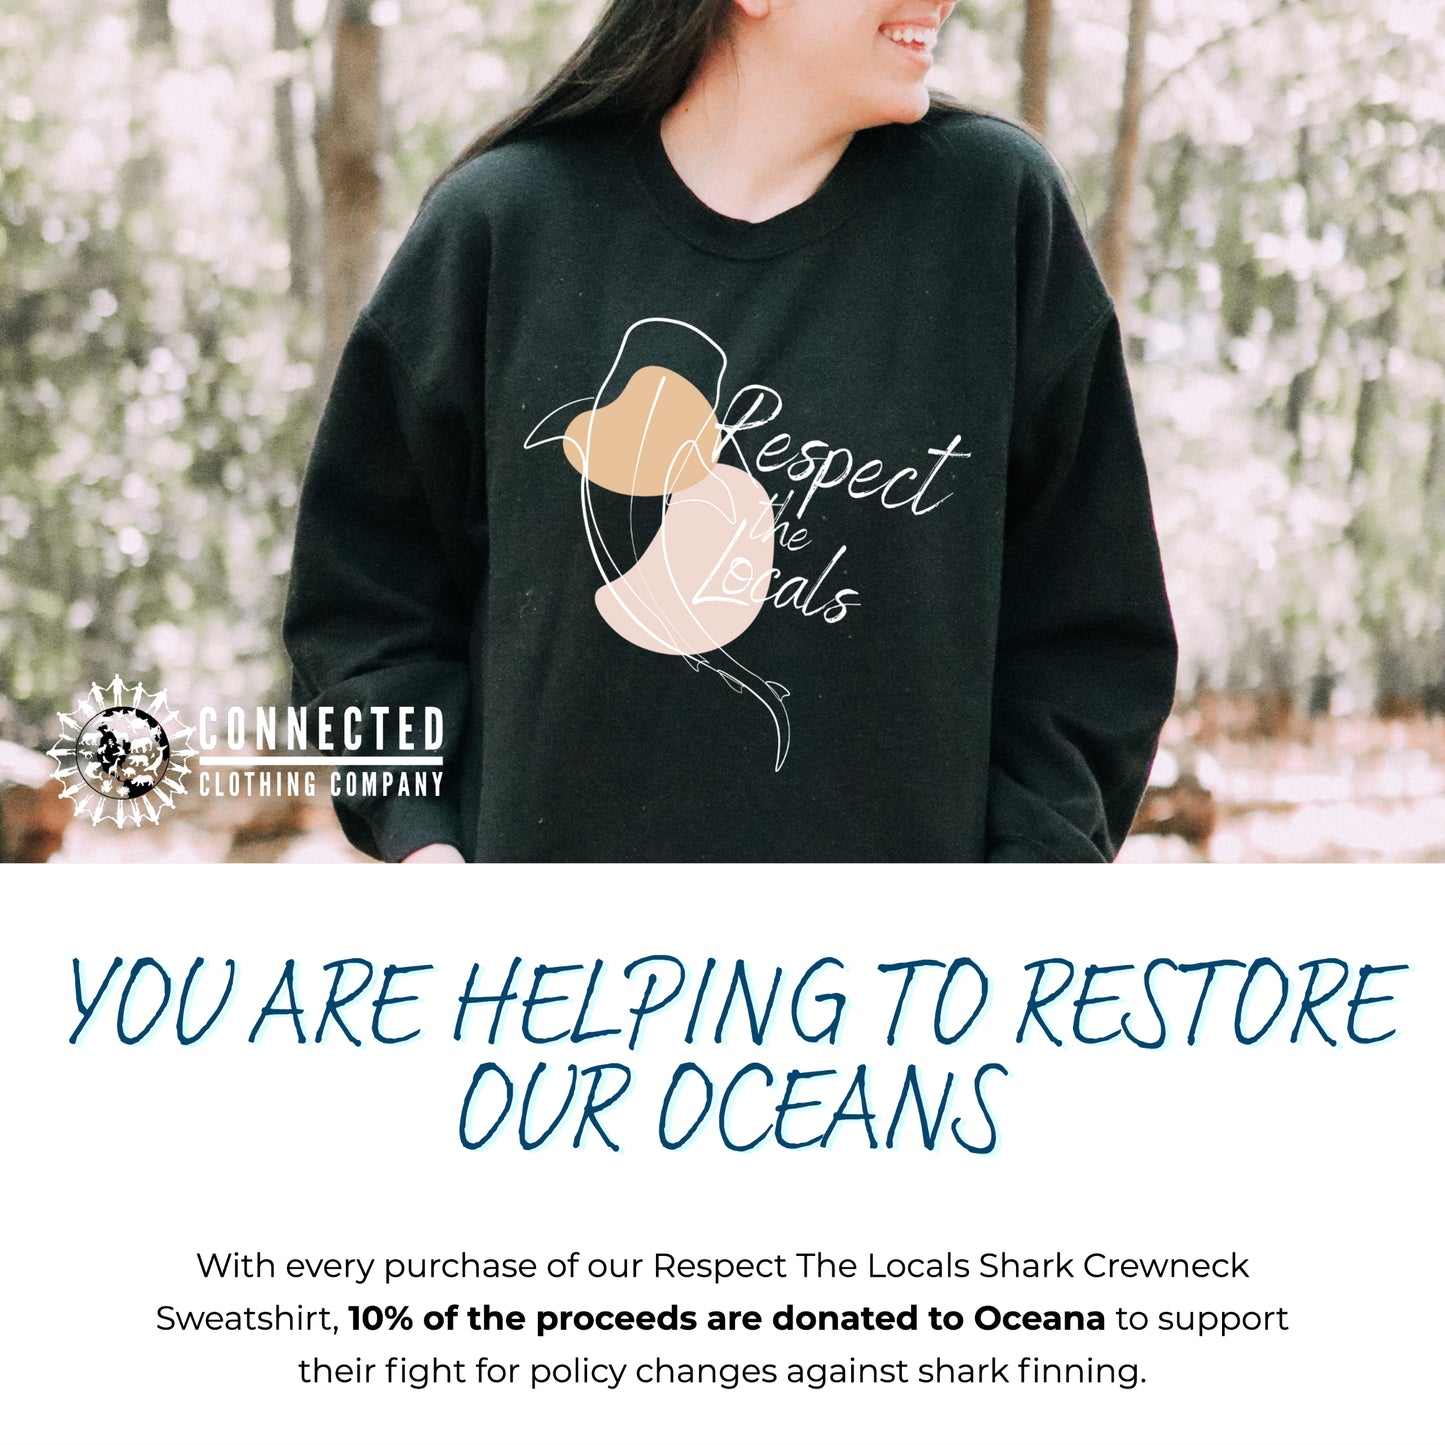 You are helping to restore our oceans. With every purchase of our Respect the locals whale shark crewneck sweatshirt, 10% of the proceeds are donated to oceana, to support their fight for policy changes against shark finning.